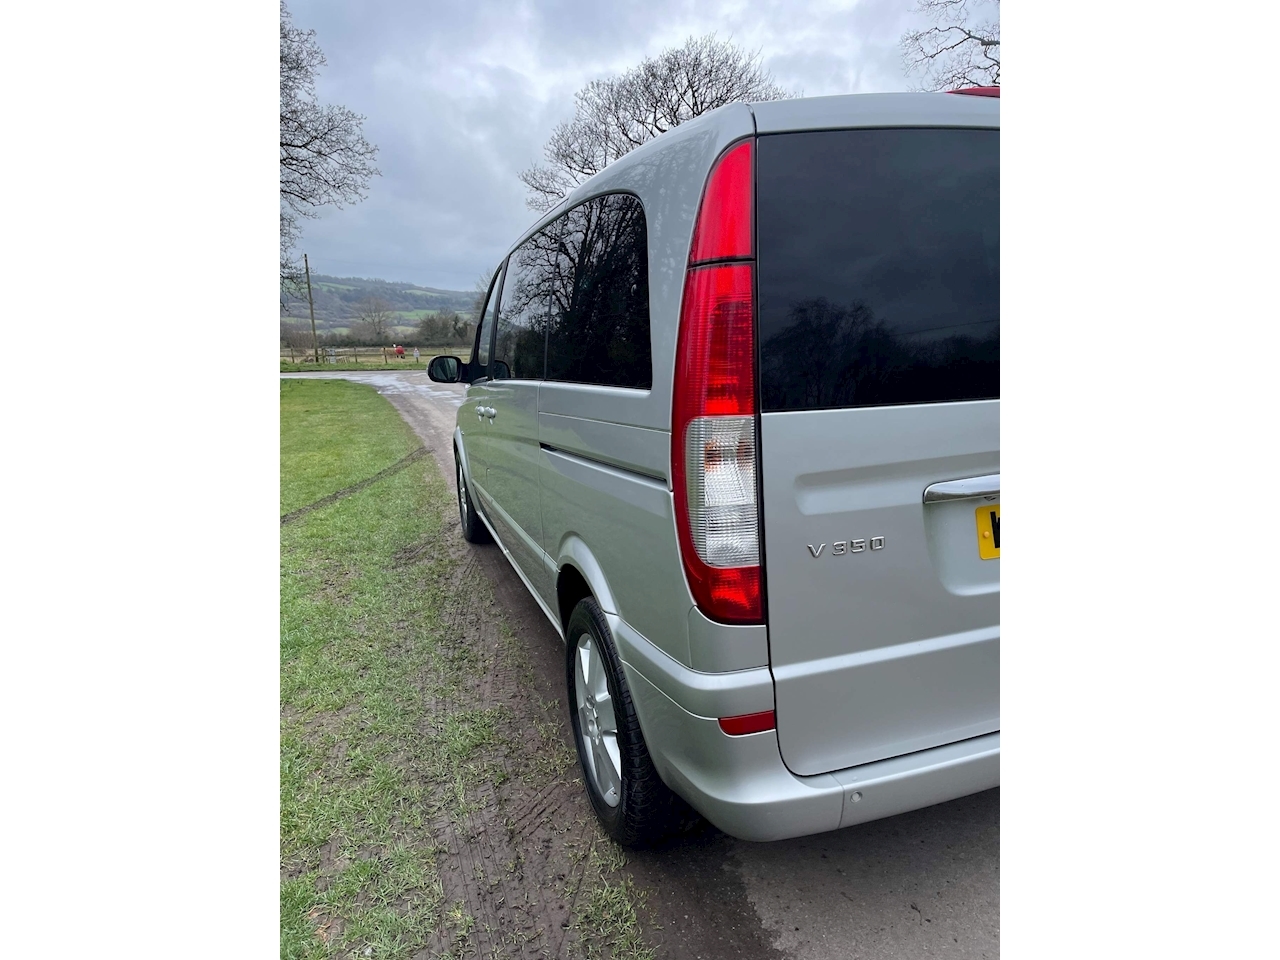 Used 2008 Mercedes-Benz Viano V350 3.5 V6 SPECIAL X-CLUSIVE MODEL 6 SEATS  AUTOMATIC SWB For Sale in Hertfordshire (U450)